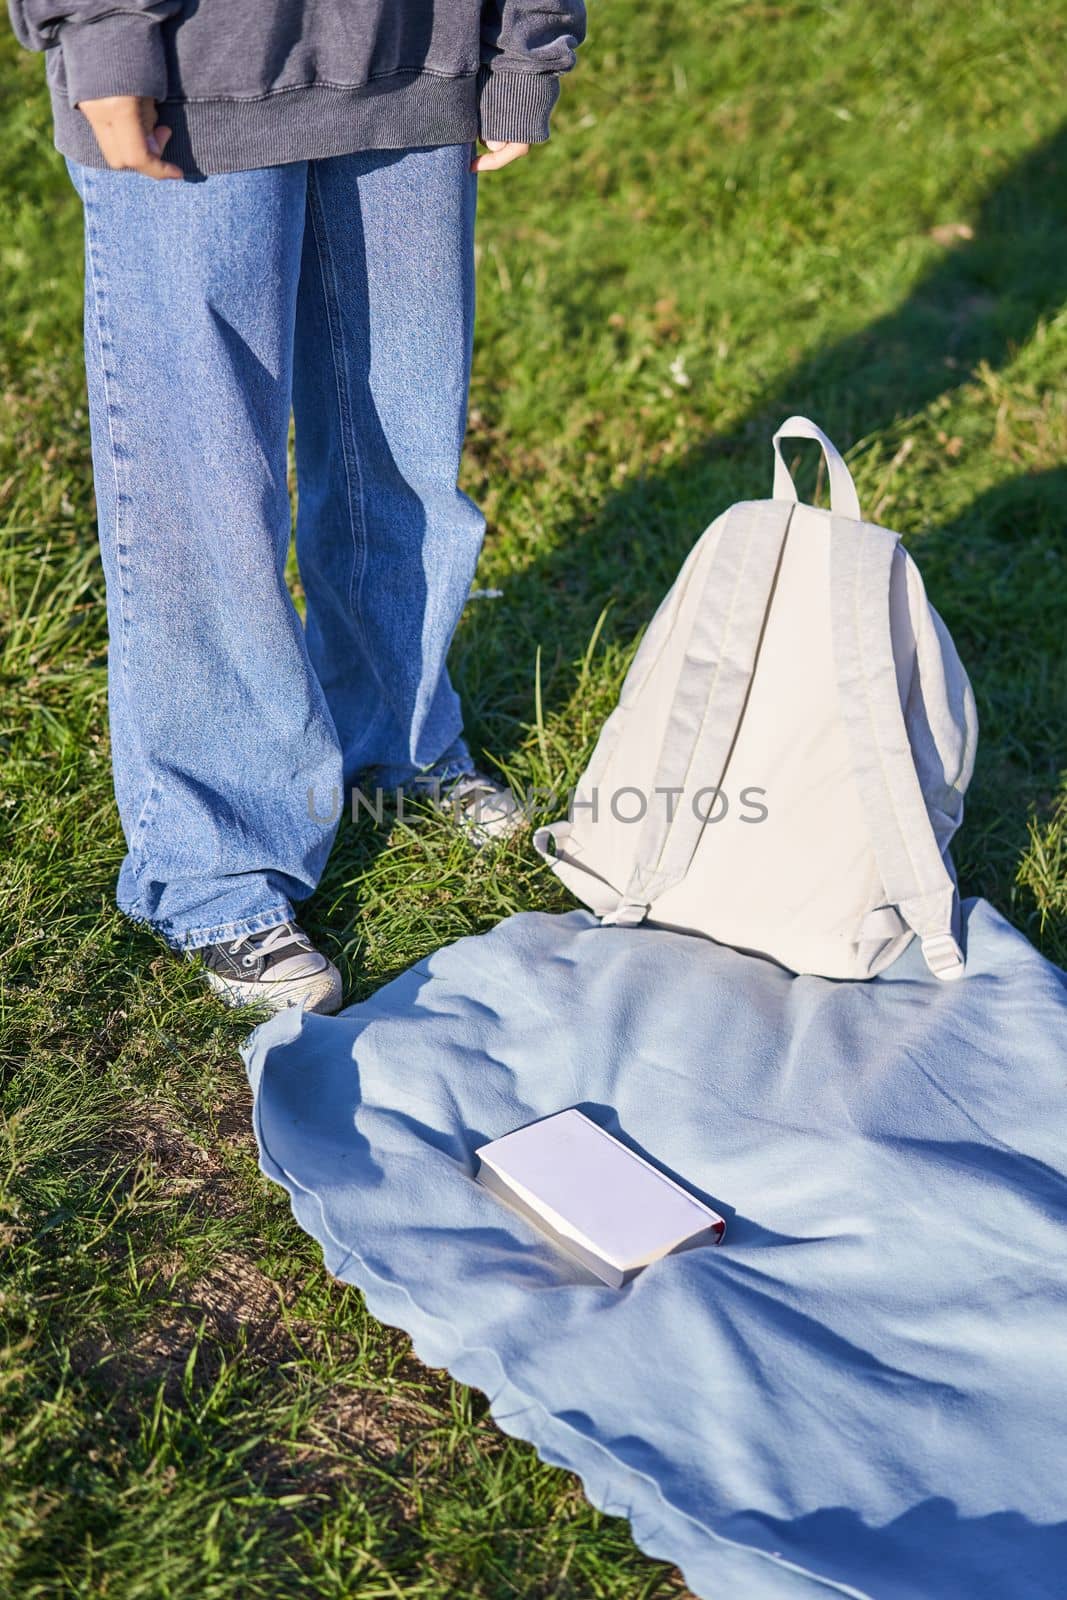 Vertical shot, young teenage girl body, standing next to blanket with backpack and book, picnic time outdoors.